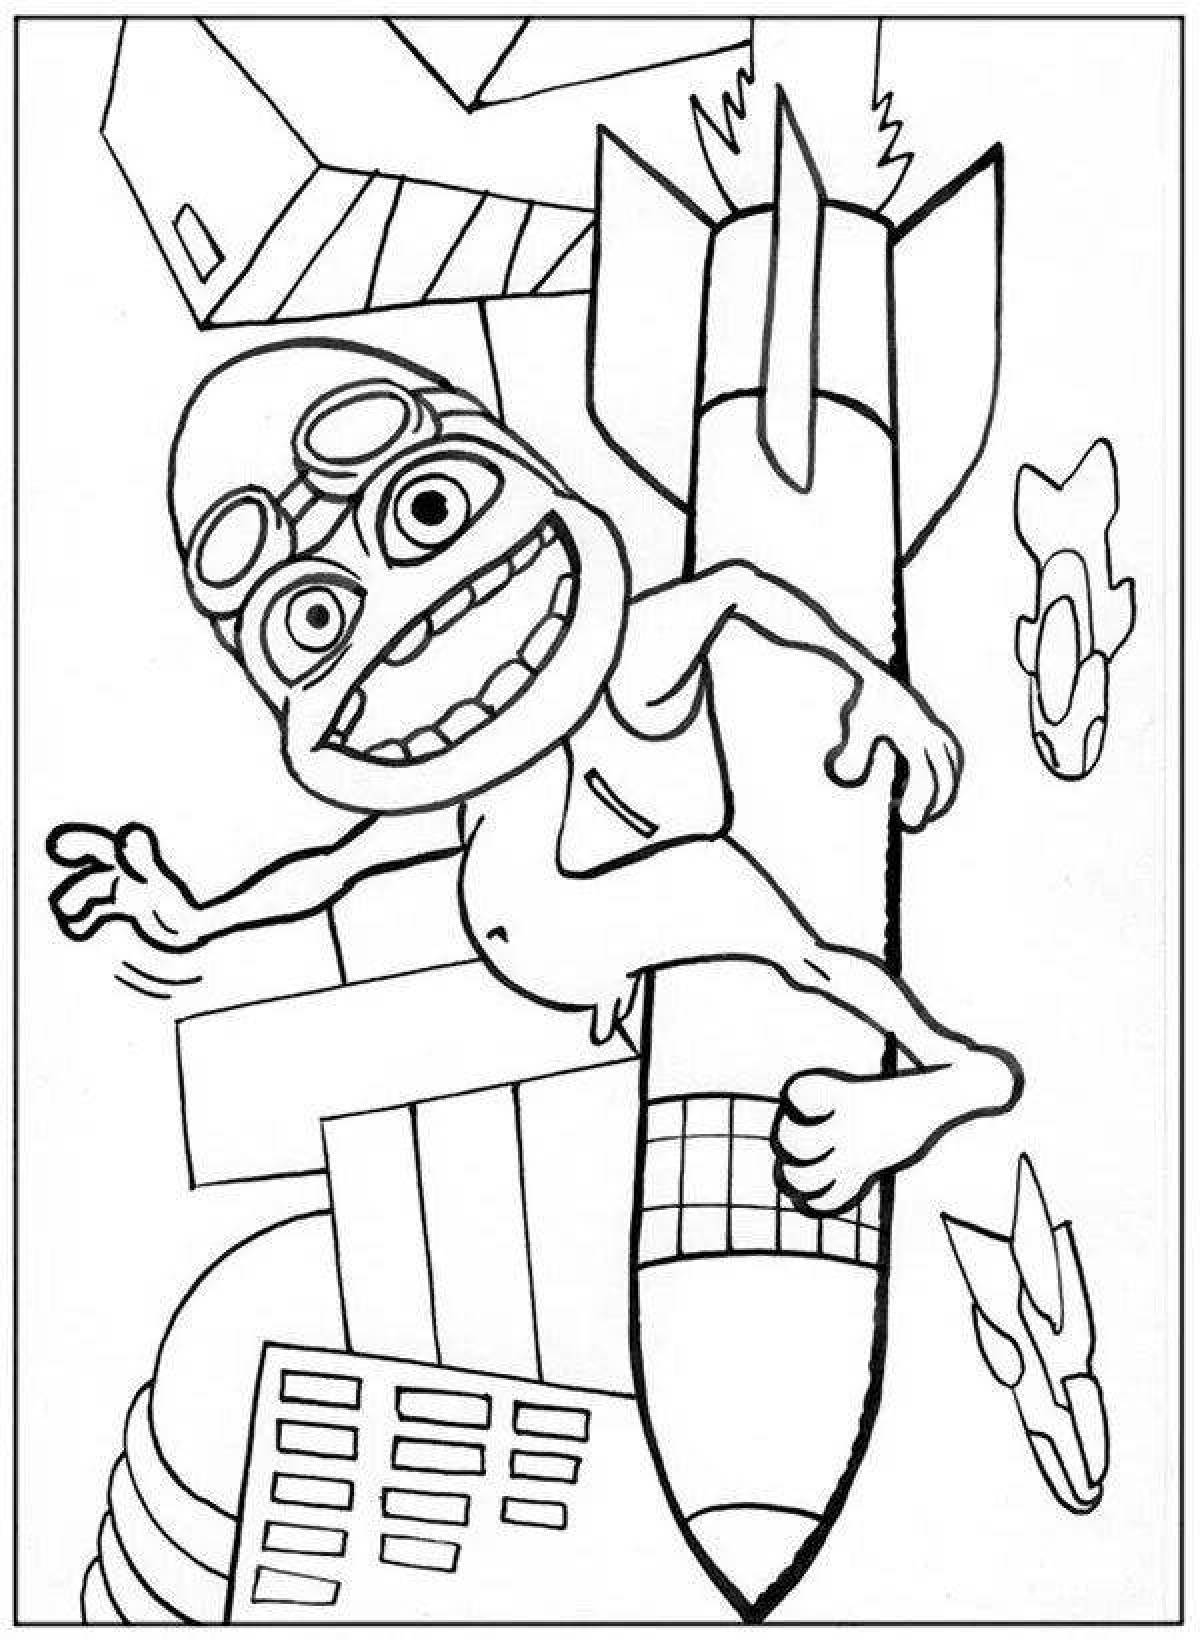 Animated crazy frog coloring page